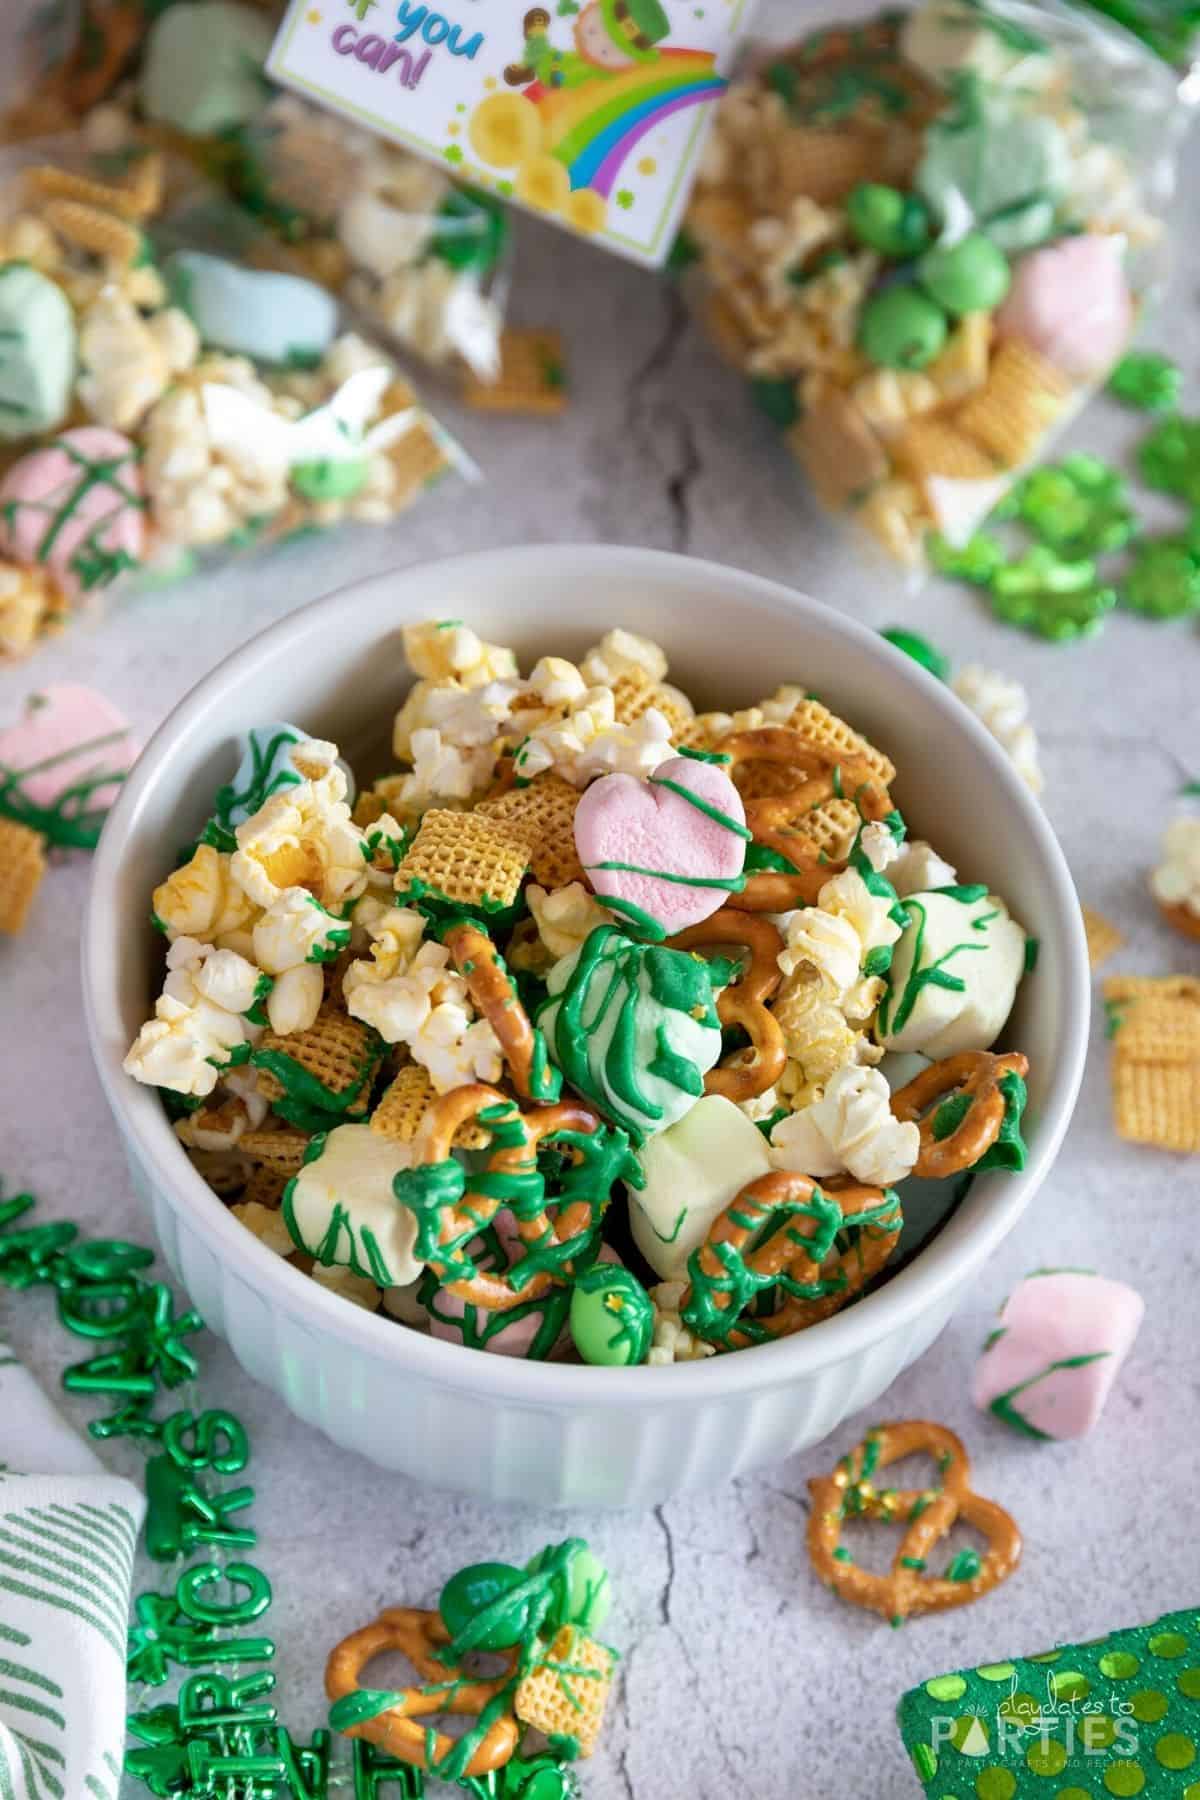 A bowl of St. Patrick's Day snack mix on a concrete surface.